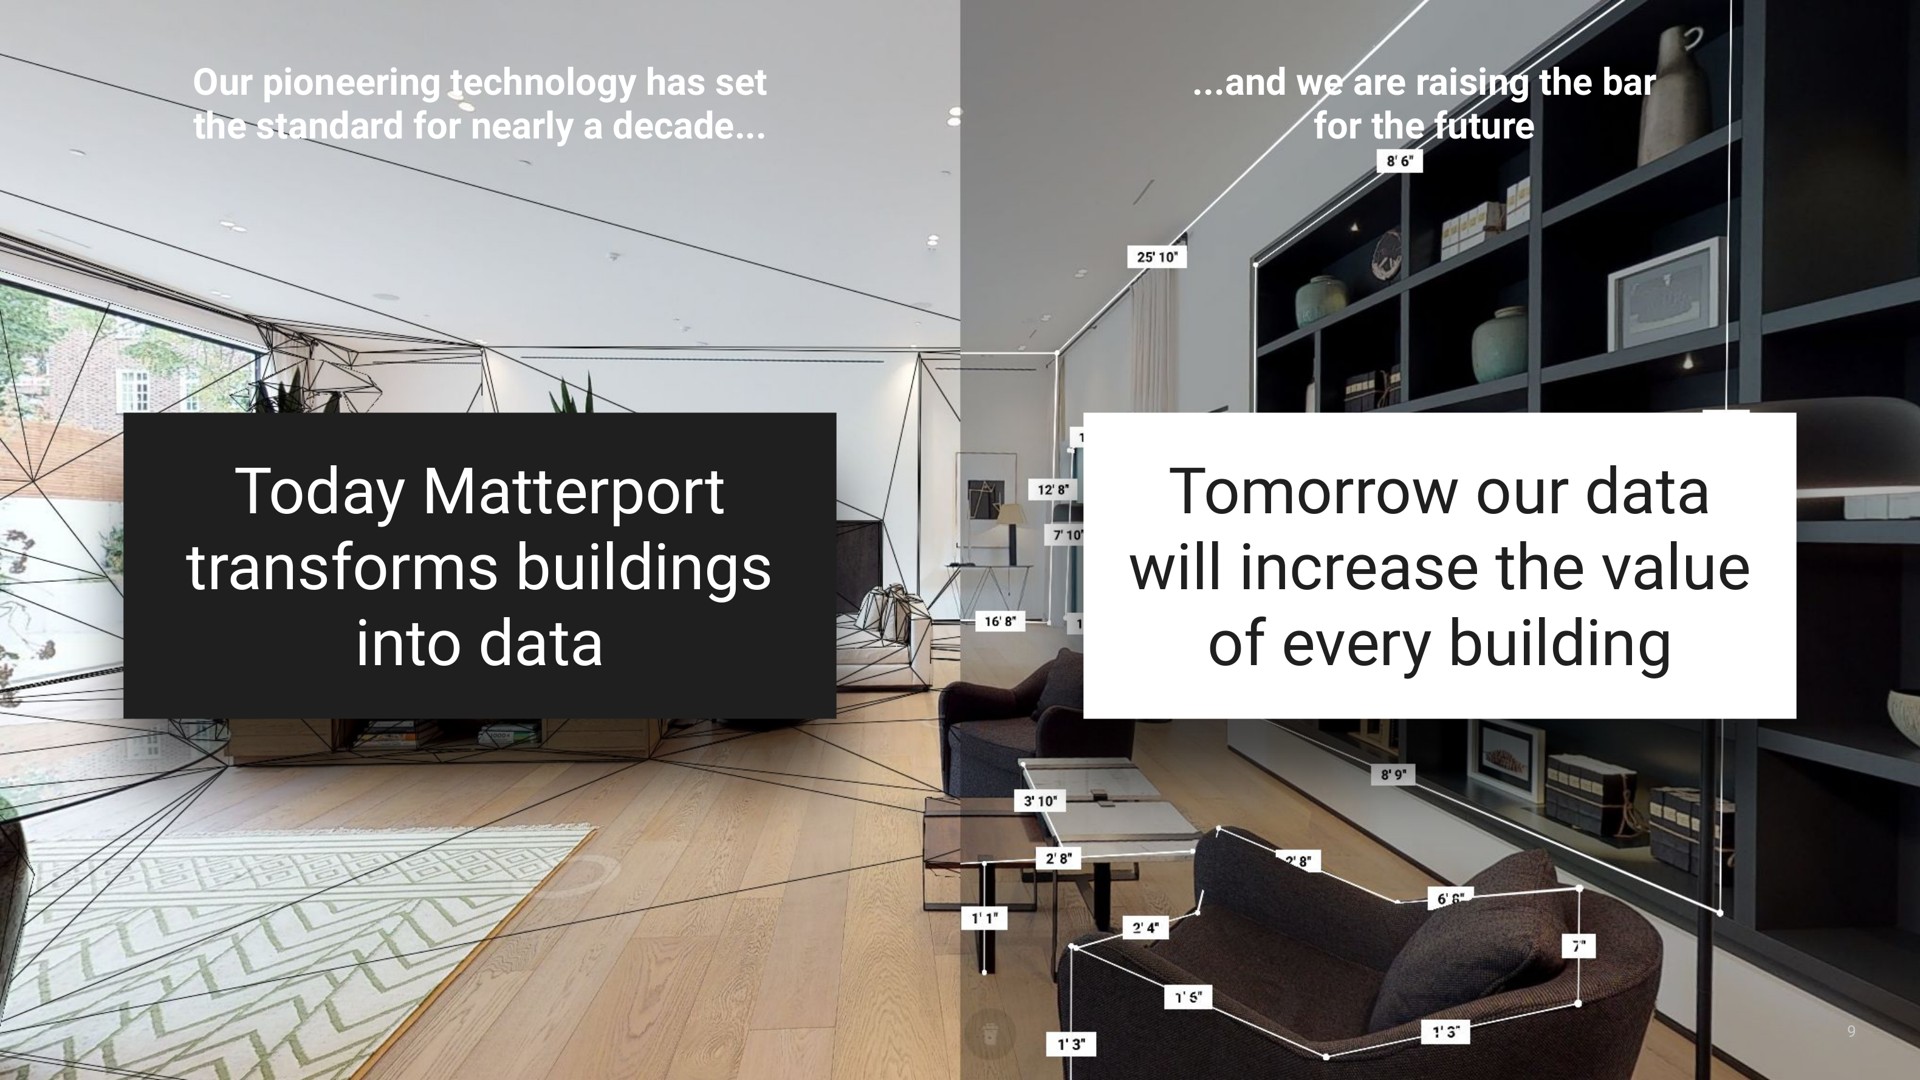 our pioneering technology has set the standard for nearly a decade and we are raising the bar for the future today transforms buildings into data tomorrow our data will increase the value of every building | Matterport